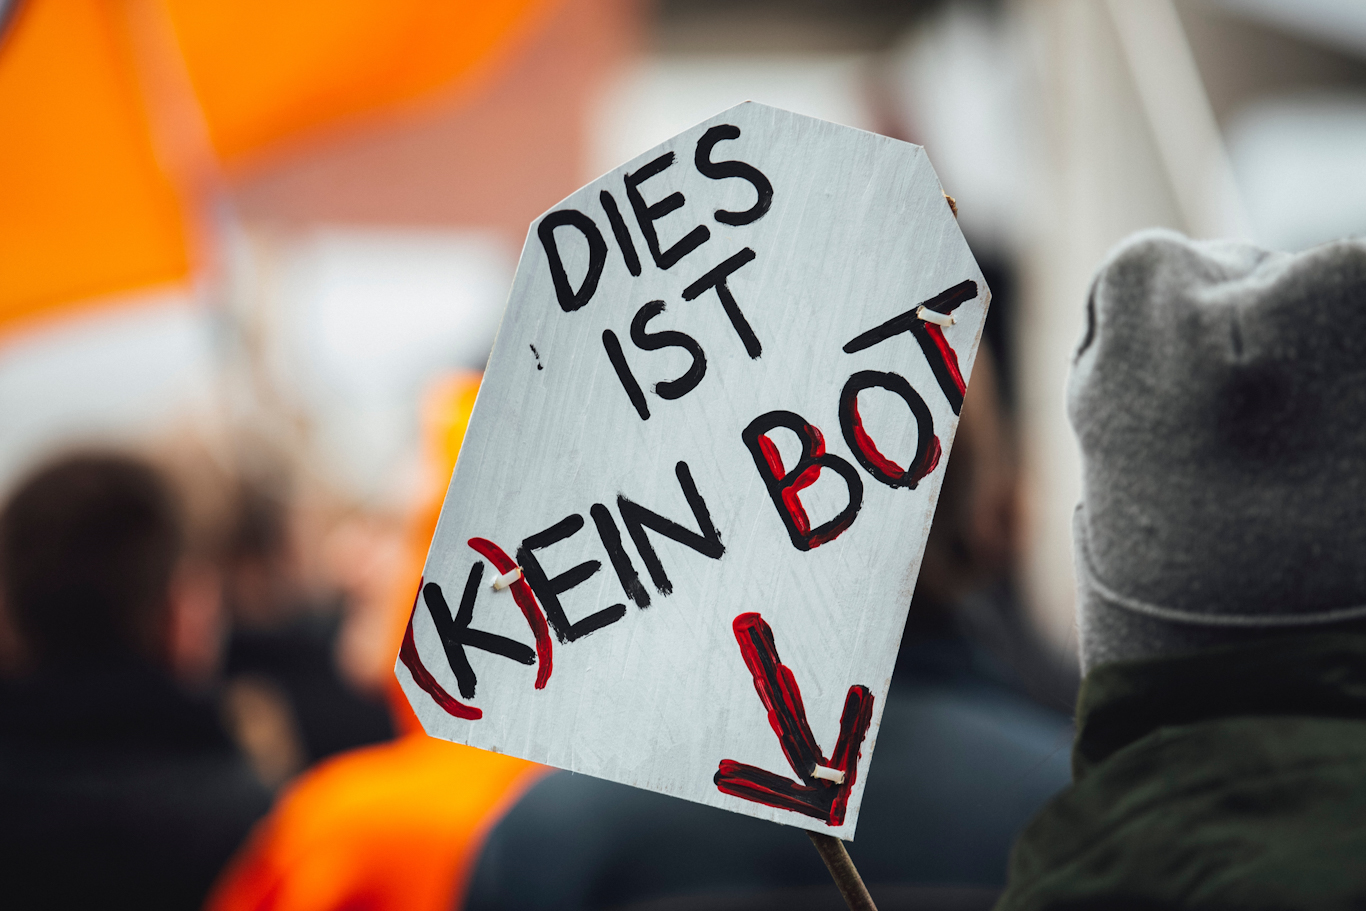 A protest sign that reads "Dies ist (K)ein Bot" with an arrow pointing down